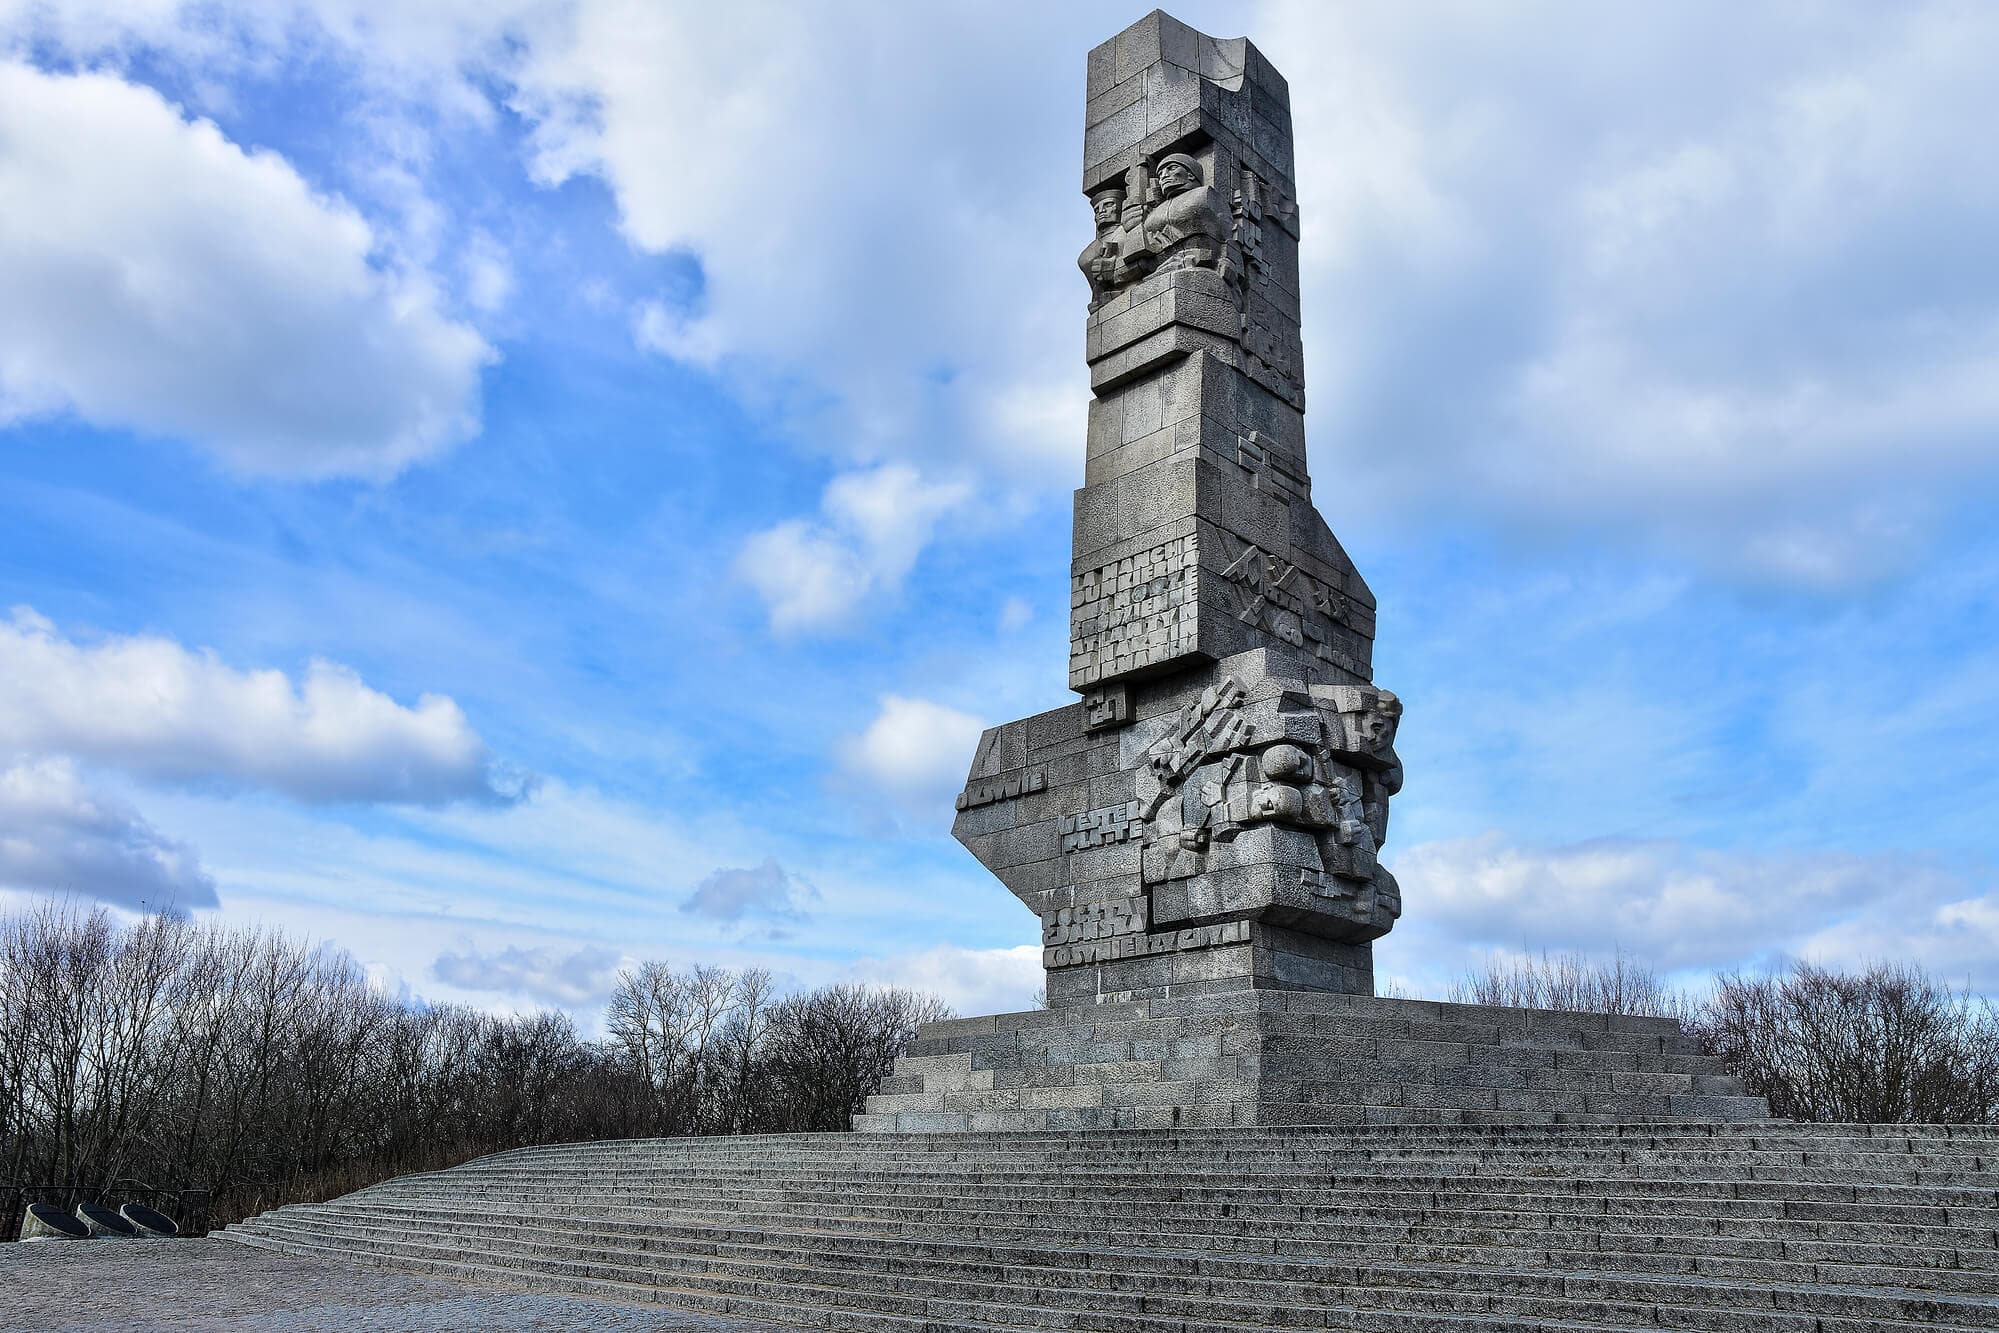 The Westerplatte monument, where World War II started, a great day trip from Gdansk